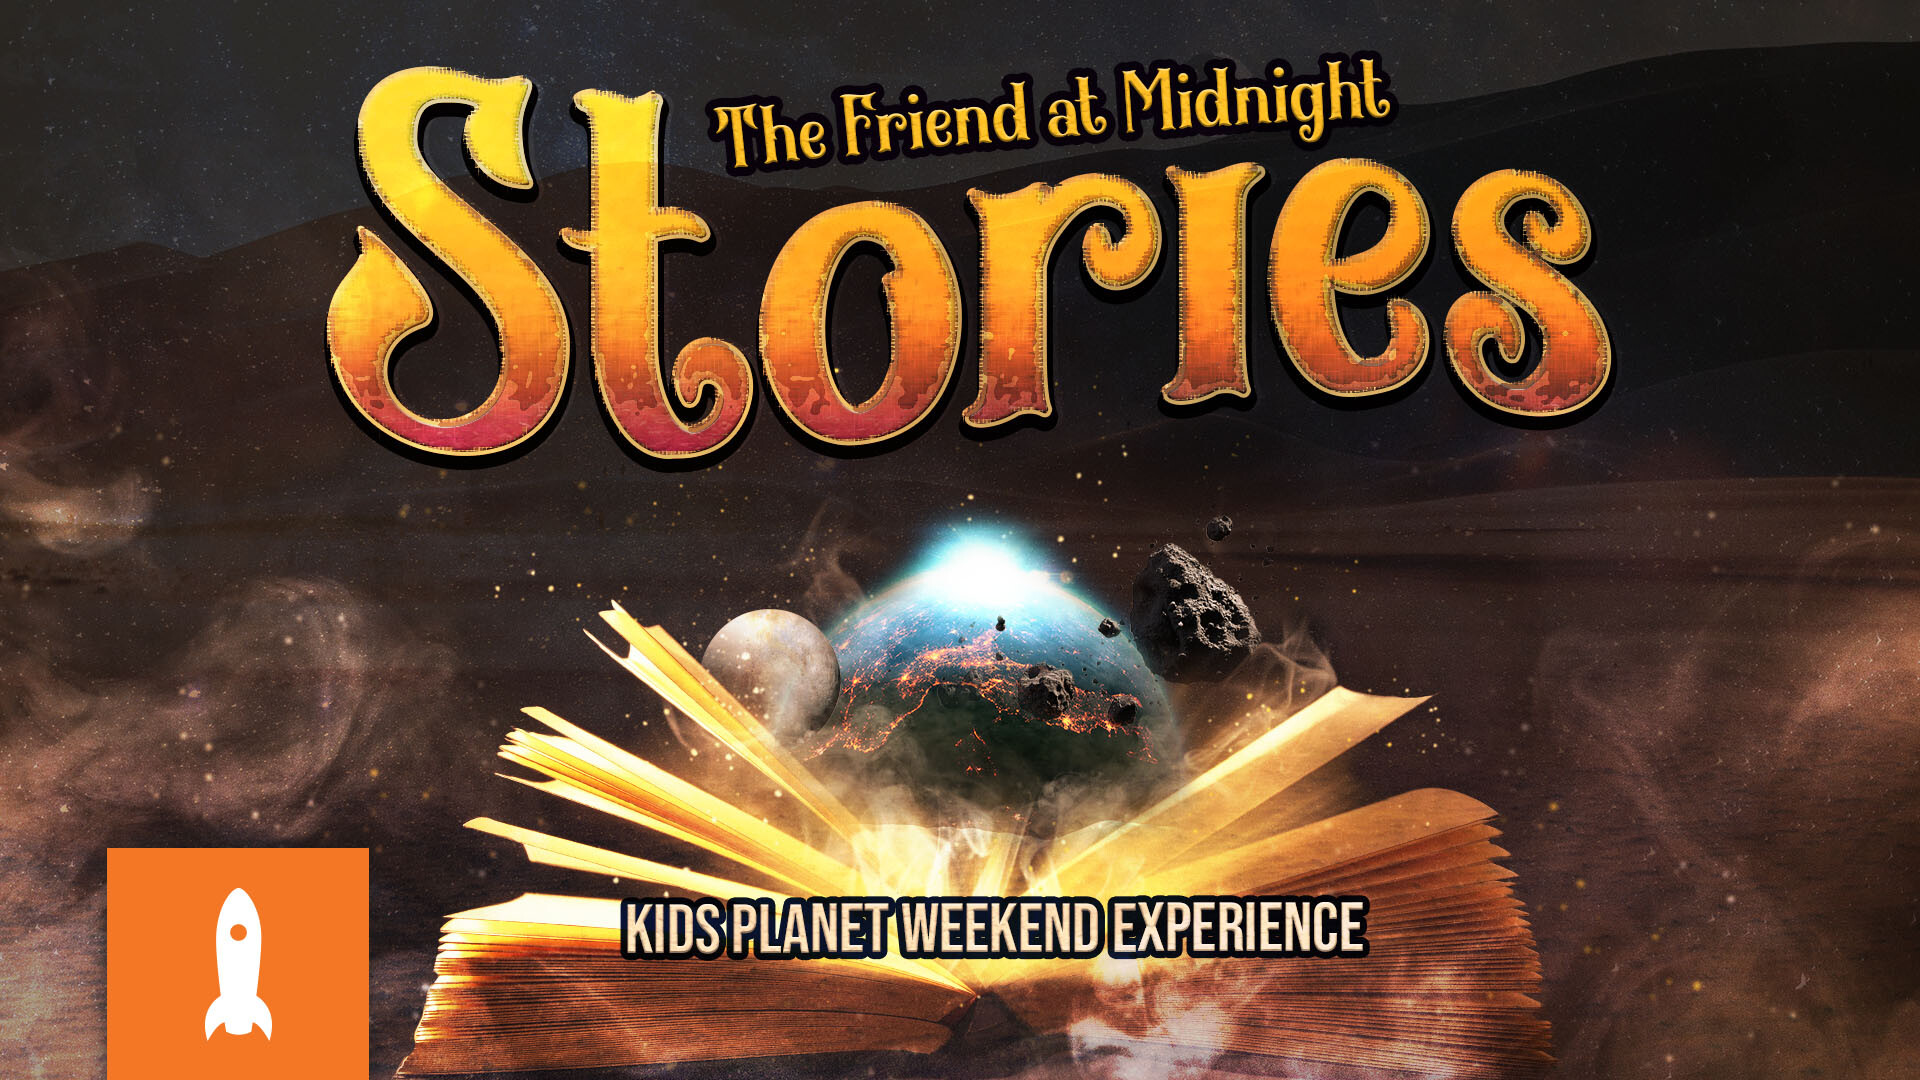 Watch Kids Planet Weekend Experience | Stories: The Friend at Midnight